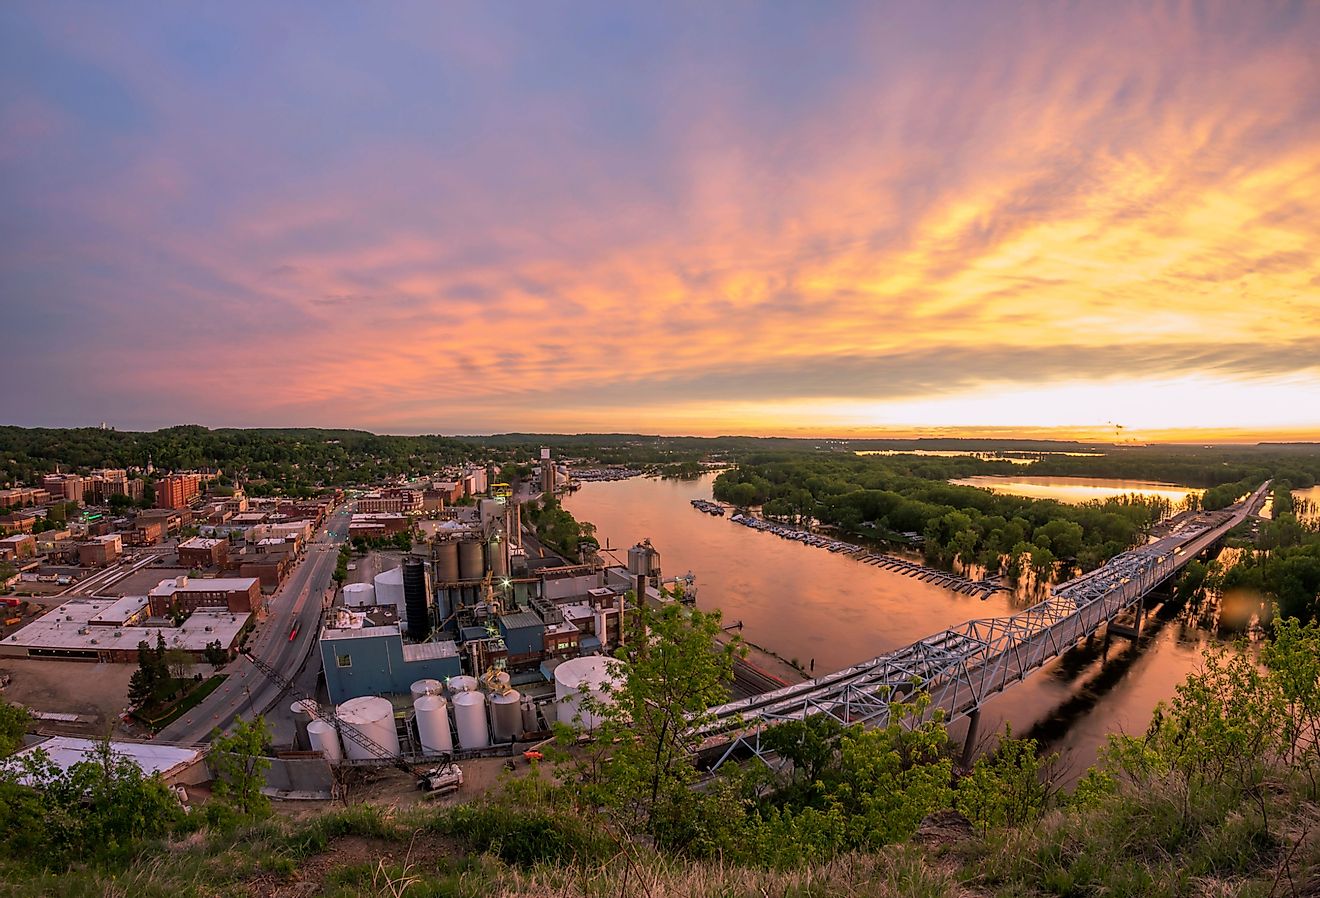 A dramatic spring sunset over the Mississippi River and Rural Red Wing, Minnesota. Image credit Sam Wagner via Shutterstock